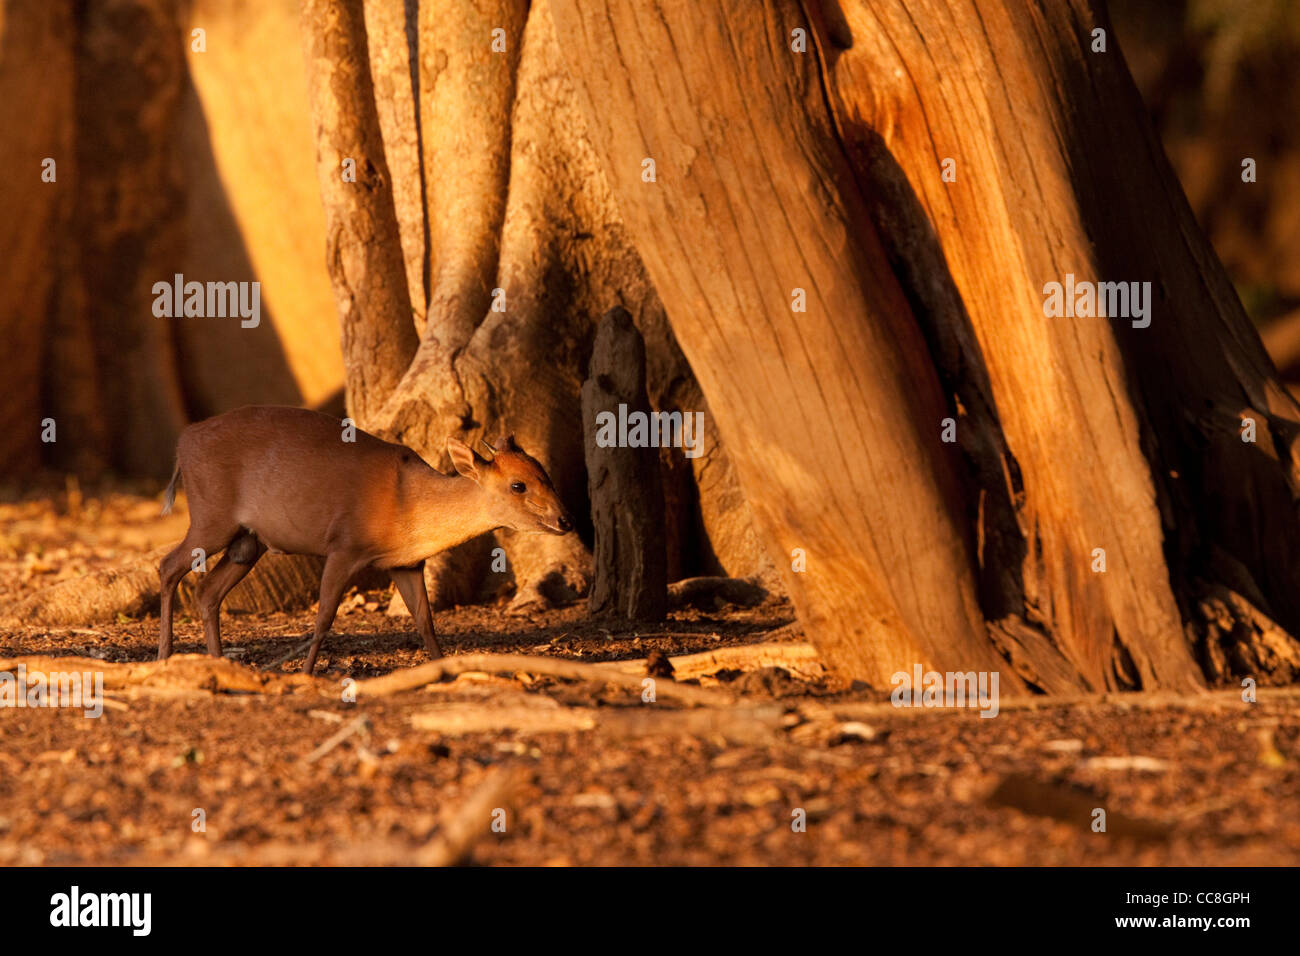 Red Forest Duiker (Cephalophus natalensis). Stock Photo